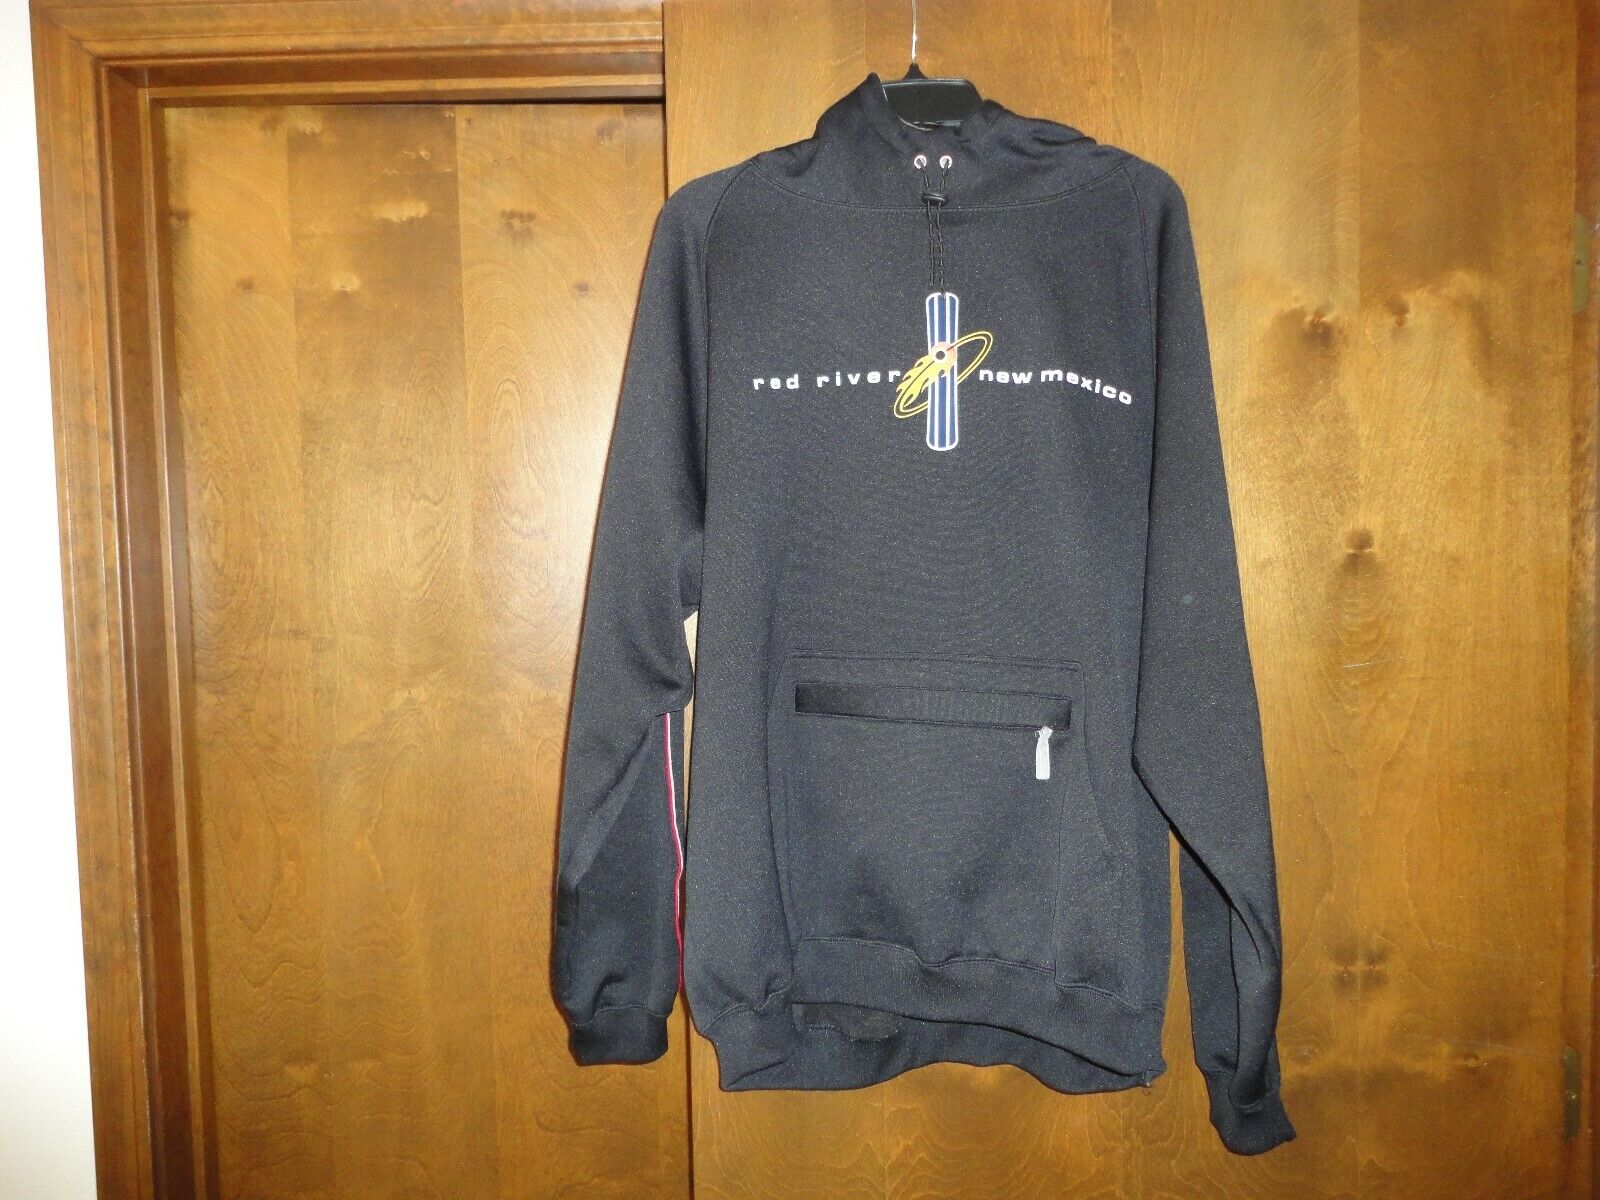 Red River hoodie xlrg tech style travel ski snowboard mountains